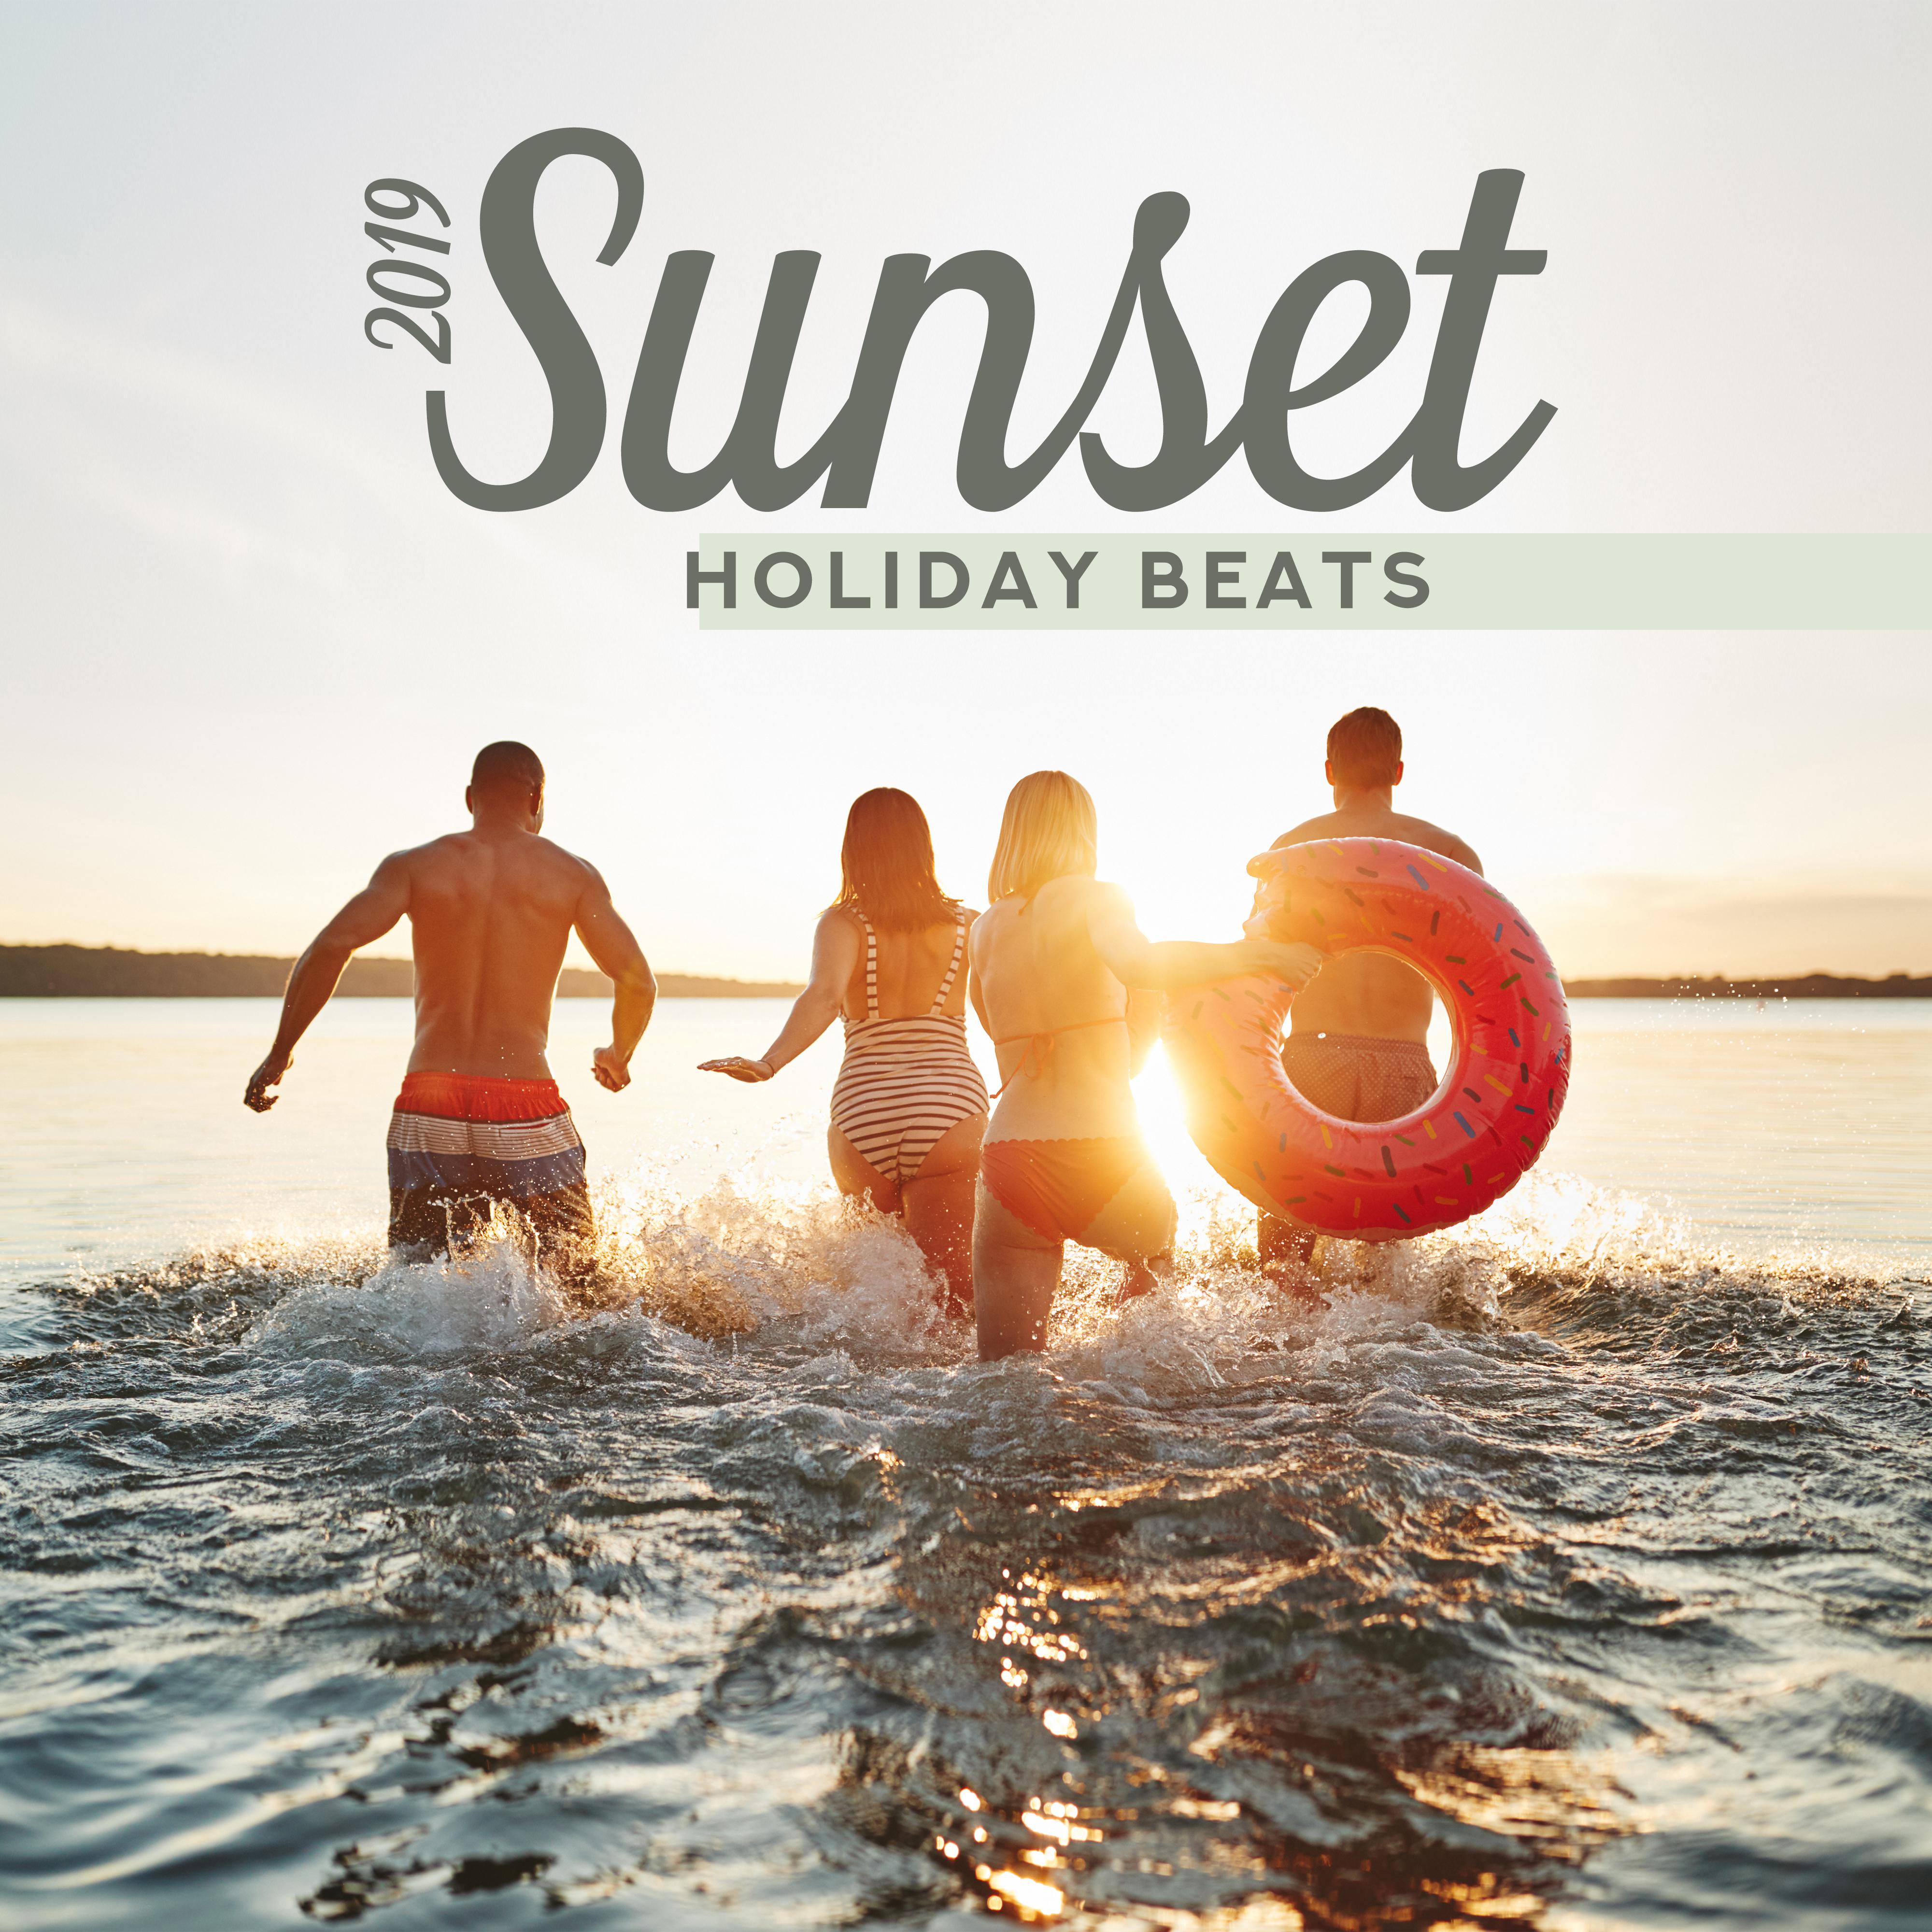 2019 Sunset Holiday Beats: 15 Chillout Songs for Relaxing on the Beach